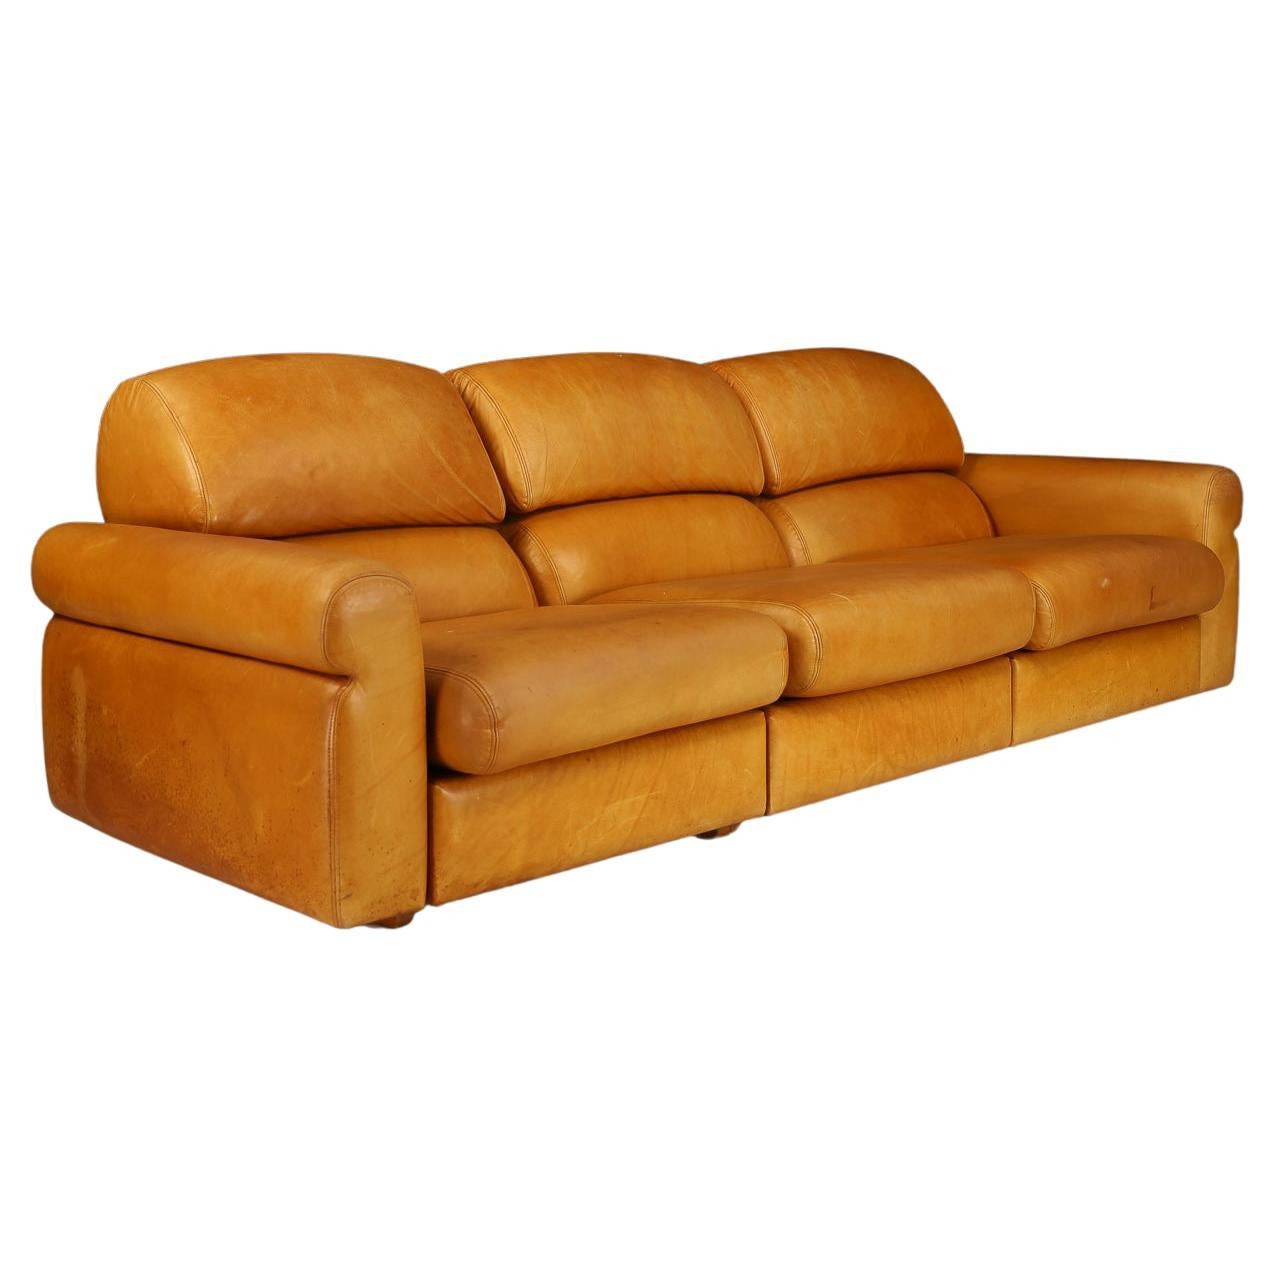 Large Mid-Century Modern Lounge Sofa in Cognac Leather, Italy 1960s For Sale